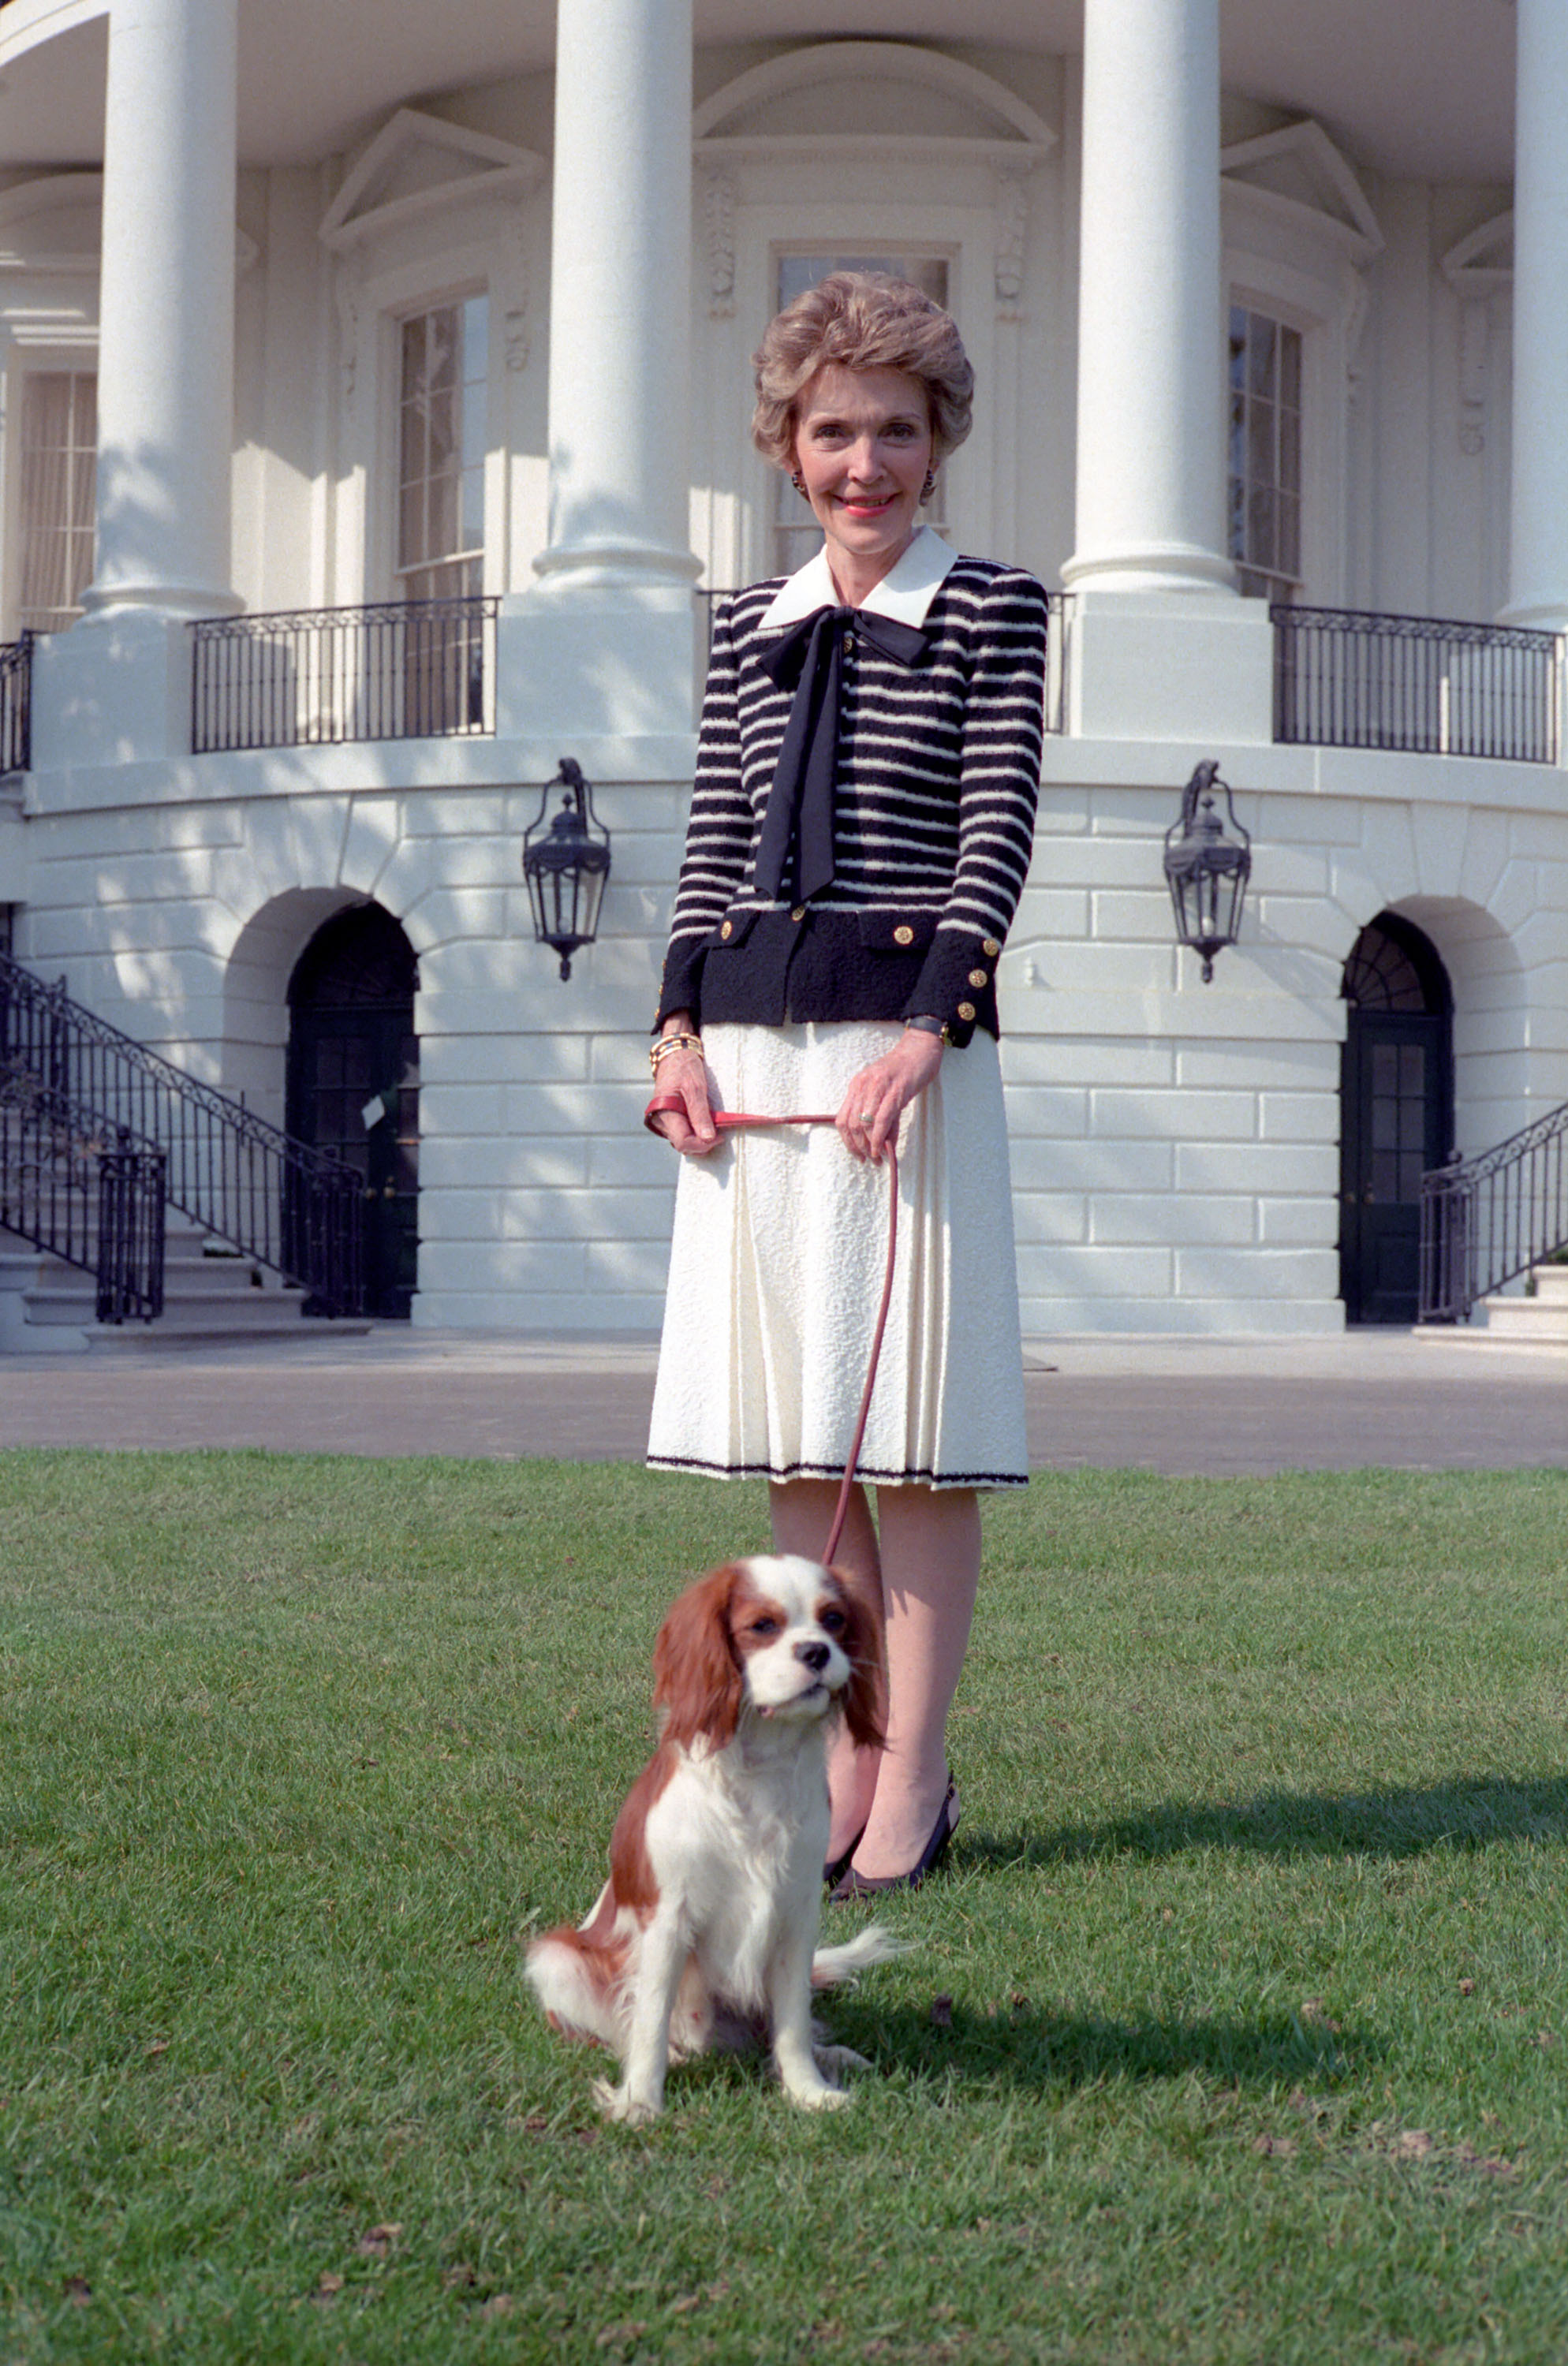 4/8/1986 Nancy Reagan and her dog Rex on the South Lawn